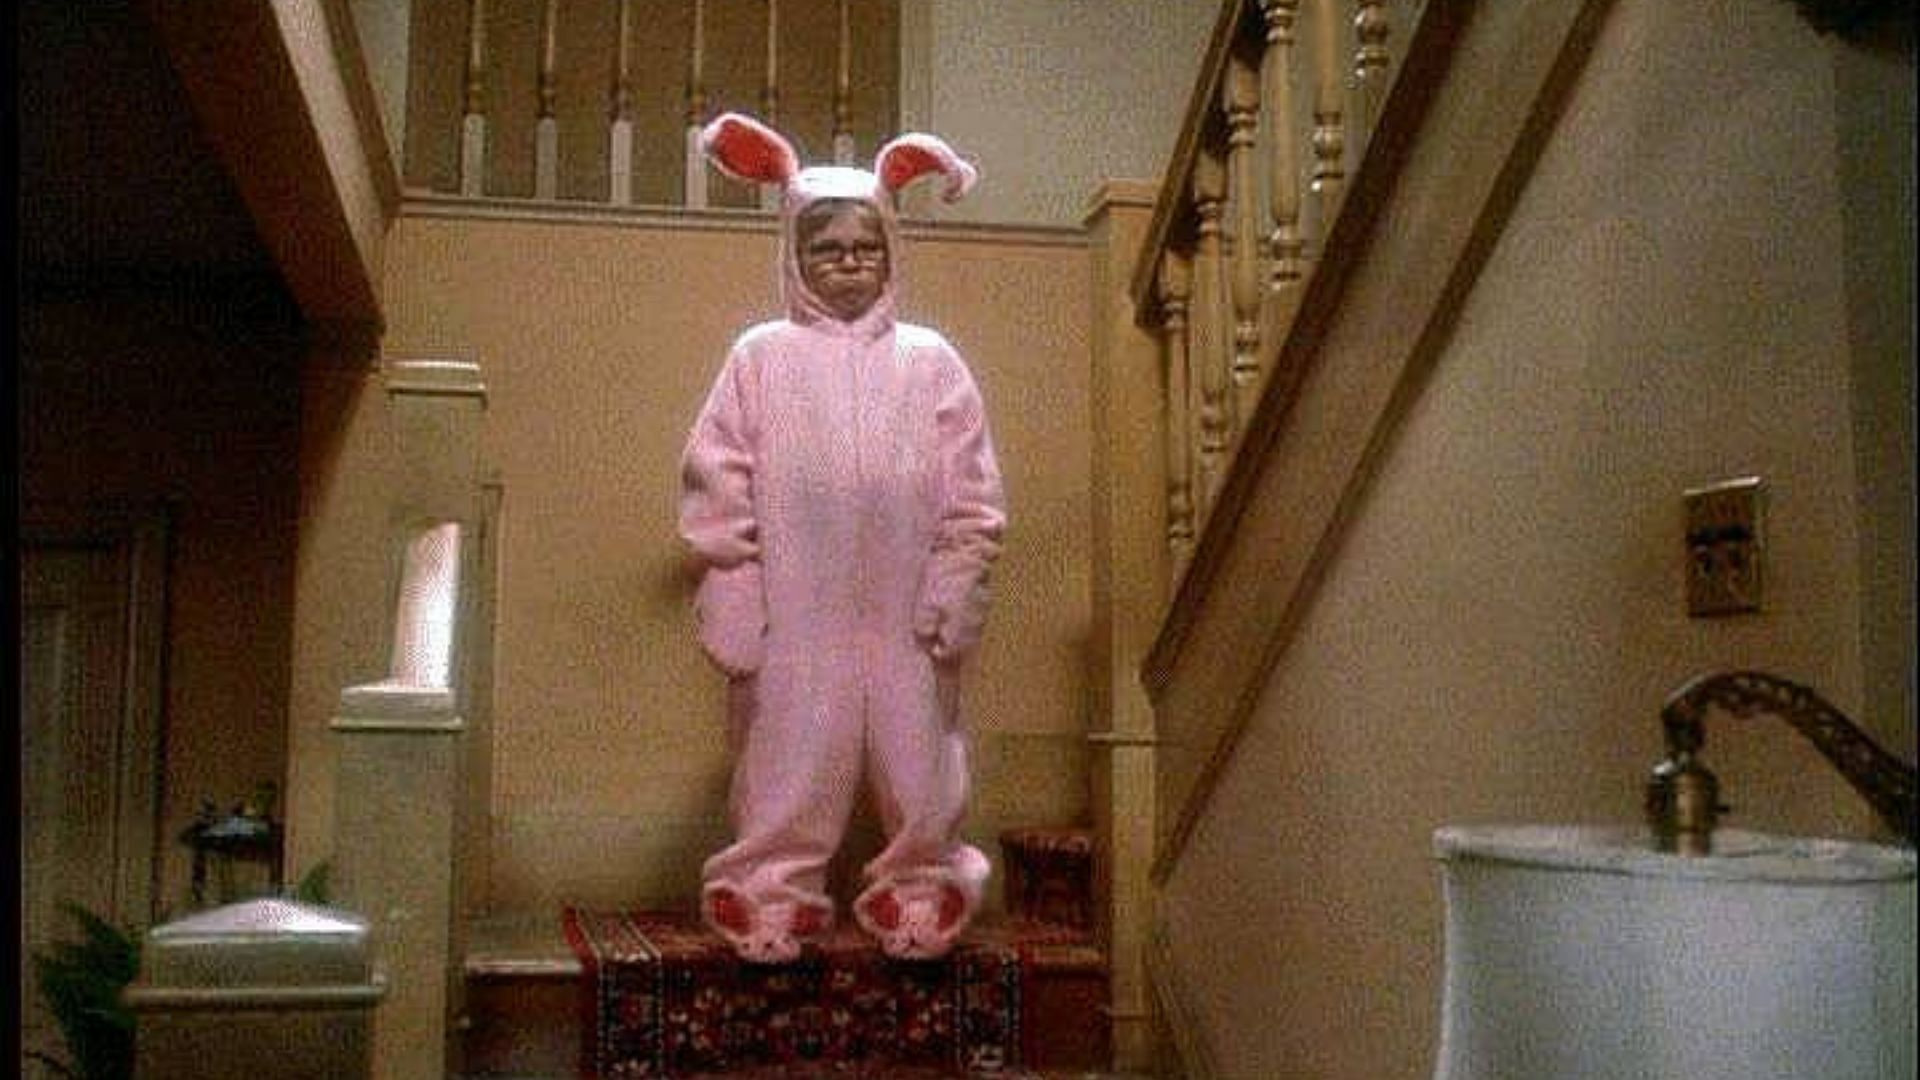 Ralphie in a still from the film (Image via Roger Ebert)